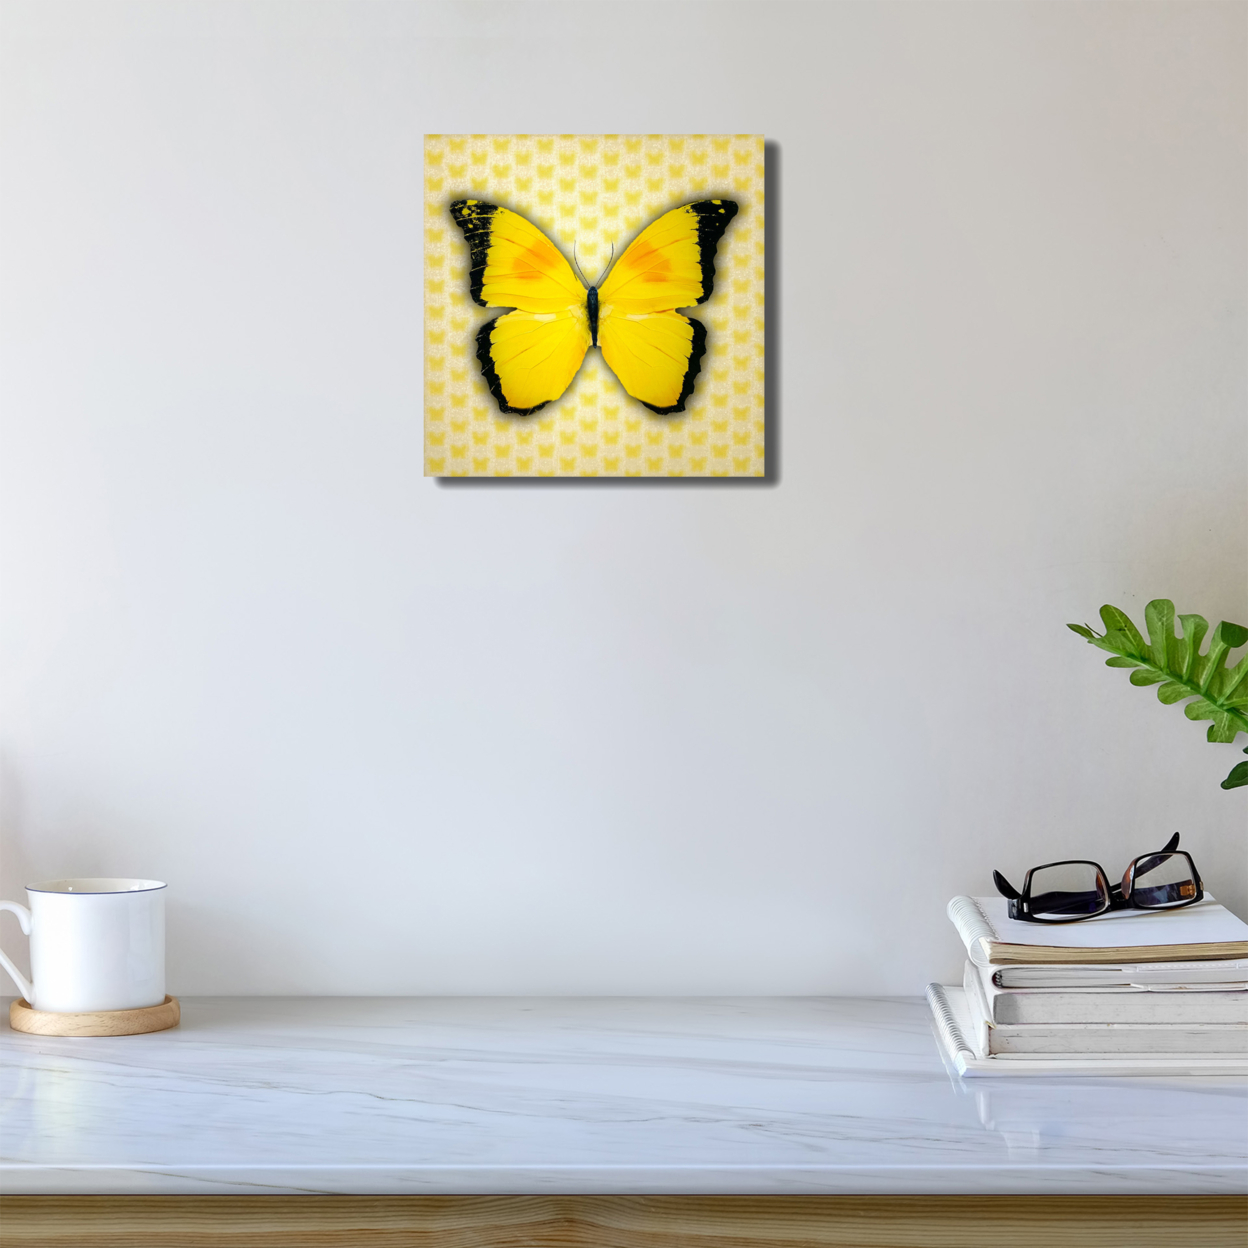 5D Multi-Dimensional Yellow Butterfly Wall Art Print On Strong Polycarbonate Panel - Immersive, Lenticular Artwork By Matashi (6x6 Inch)